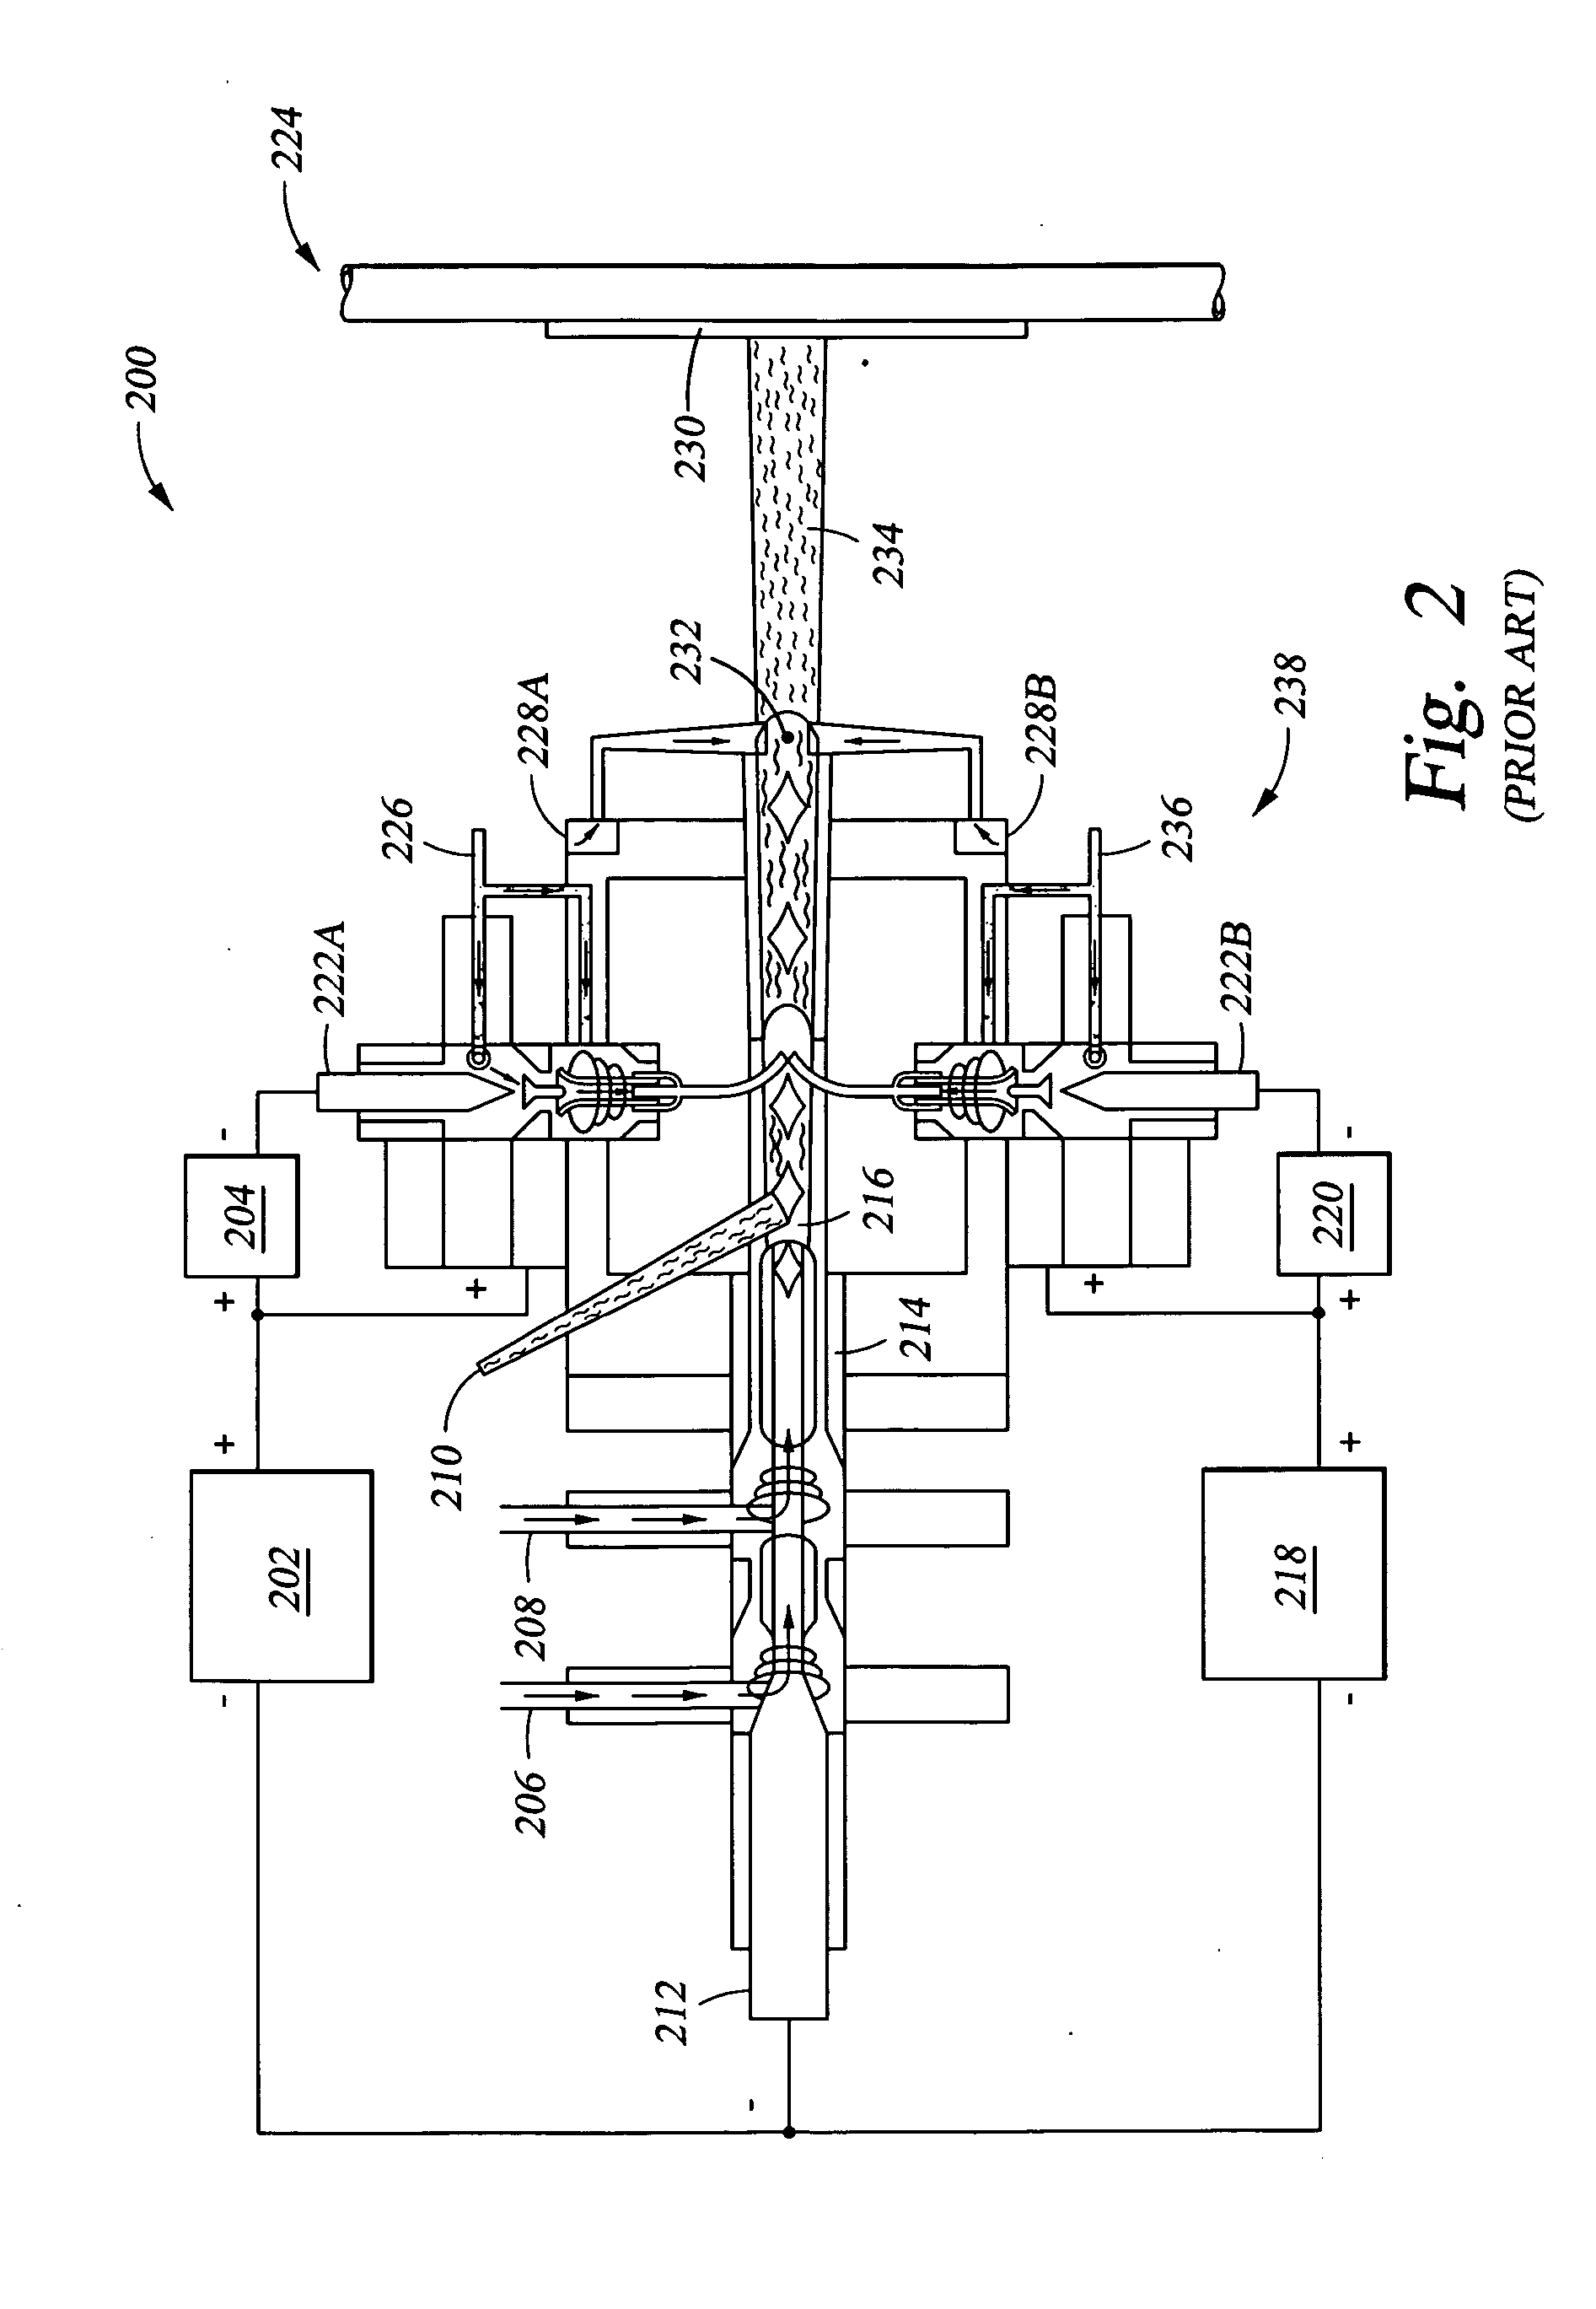 Clean, dense yttrium oxide coating protecting semiconductor processing apparatus